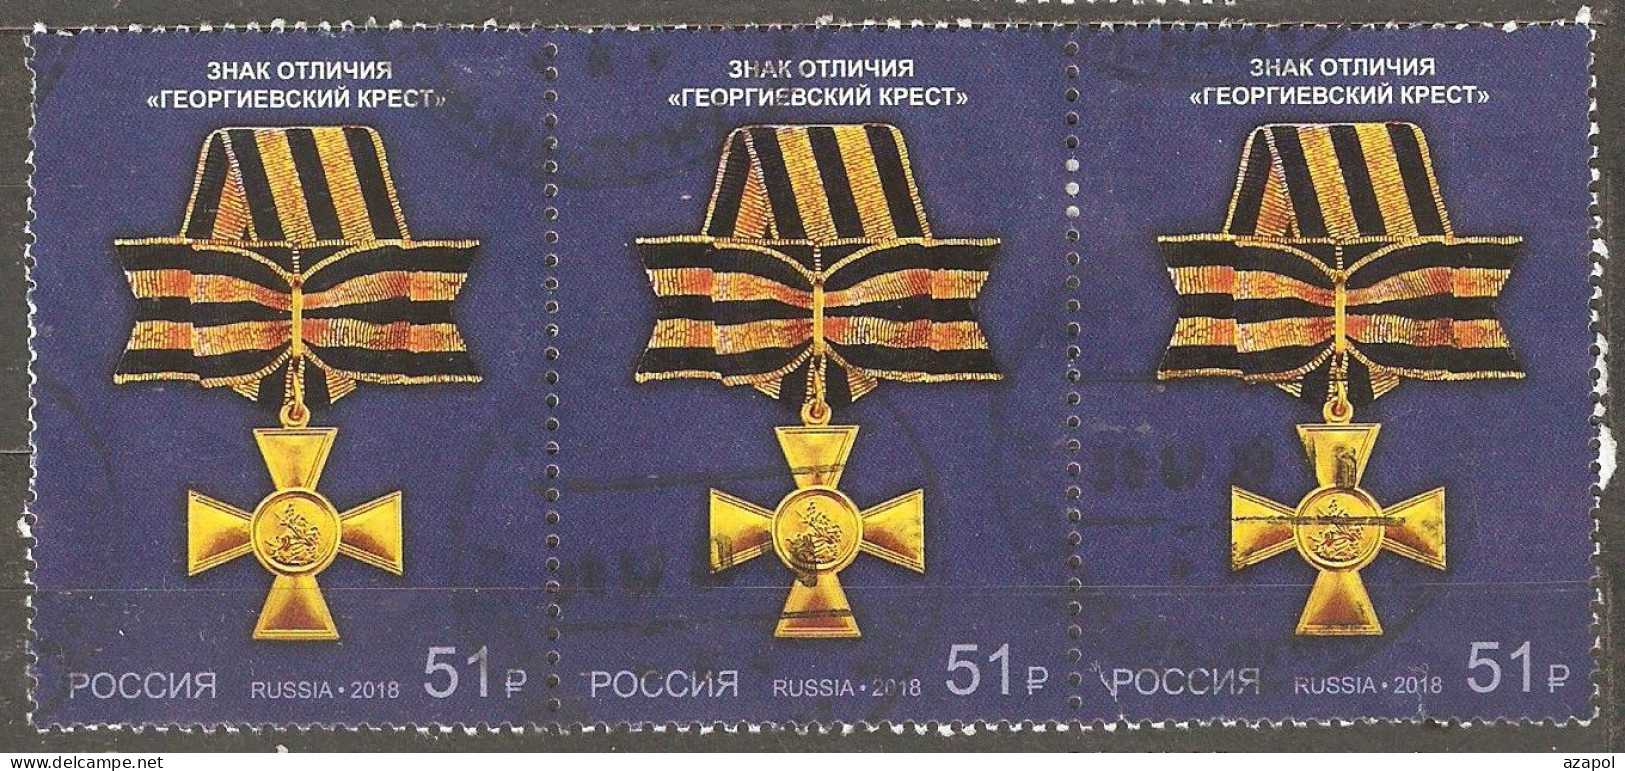 Russia: 1 Used Stamp Of A Set In Strip Of 3, State Awards Of Russian Federation - St. George's Cross, 2018, Mi#2647 - Usati